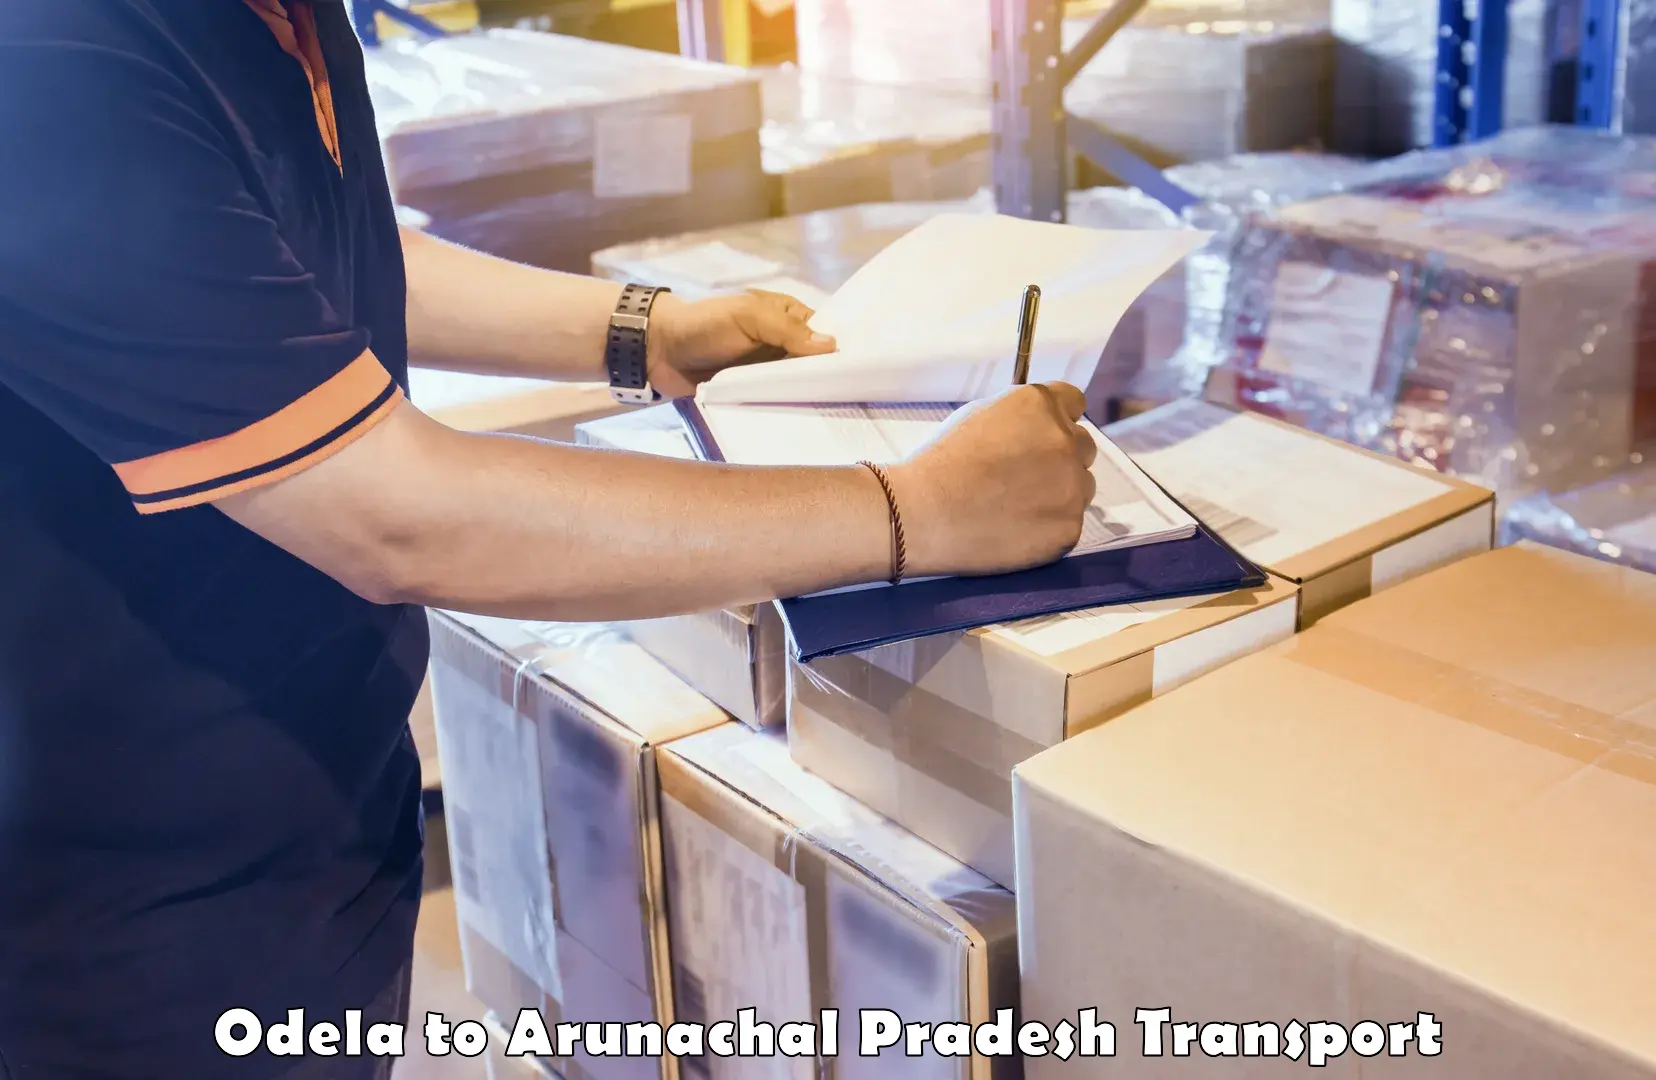 Truck transport companies in India Odela to Changlang